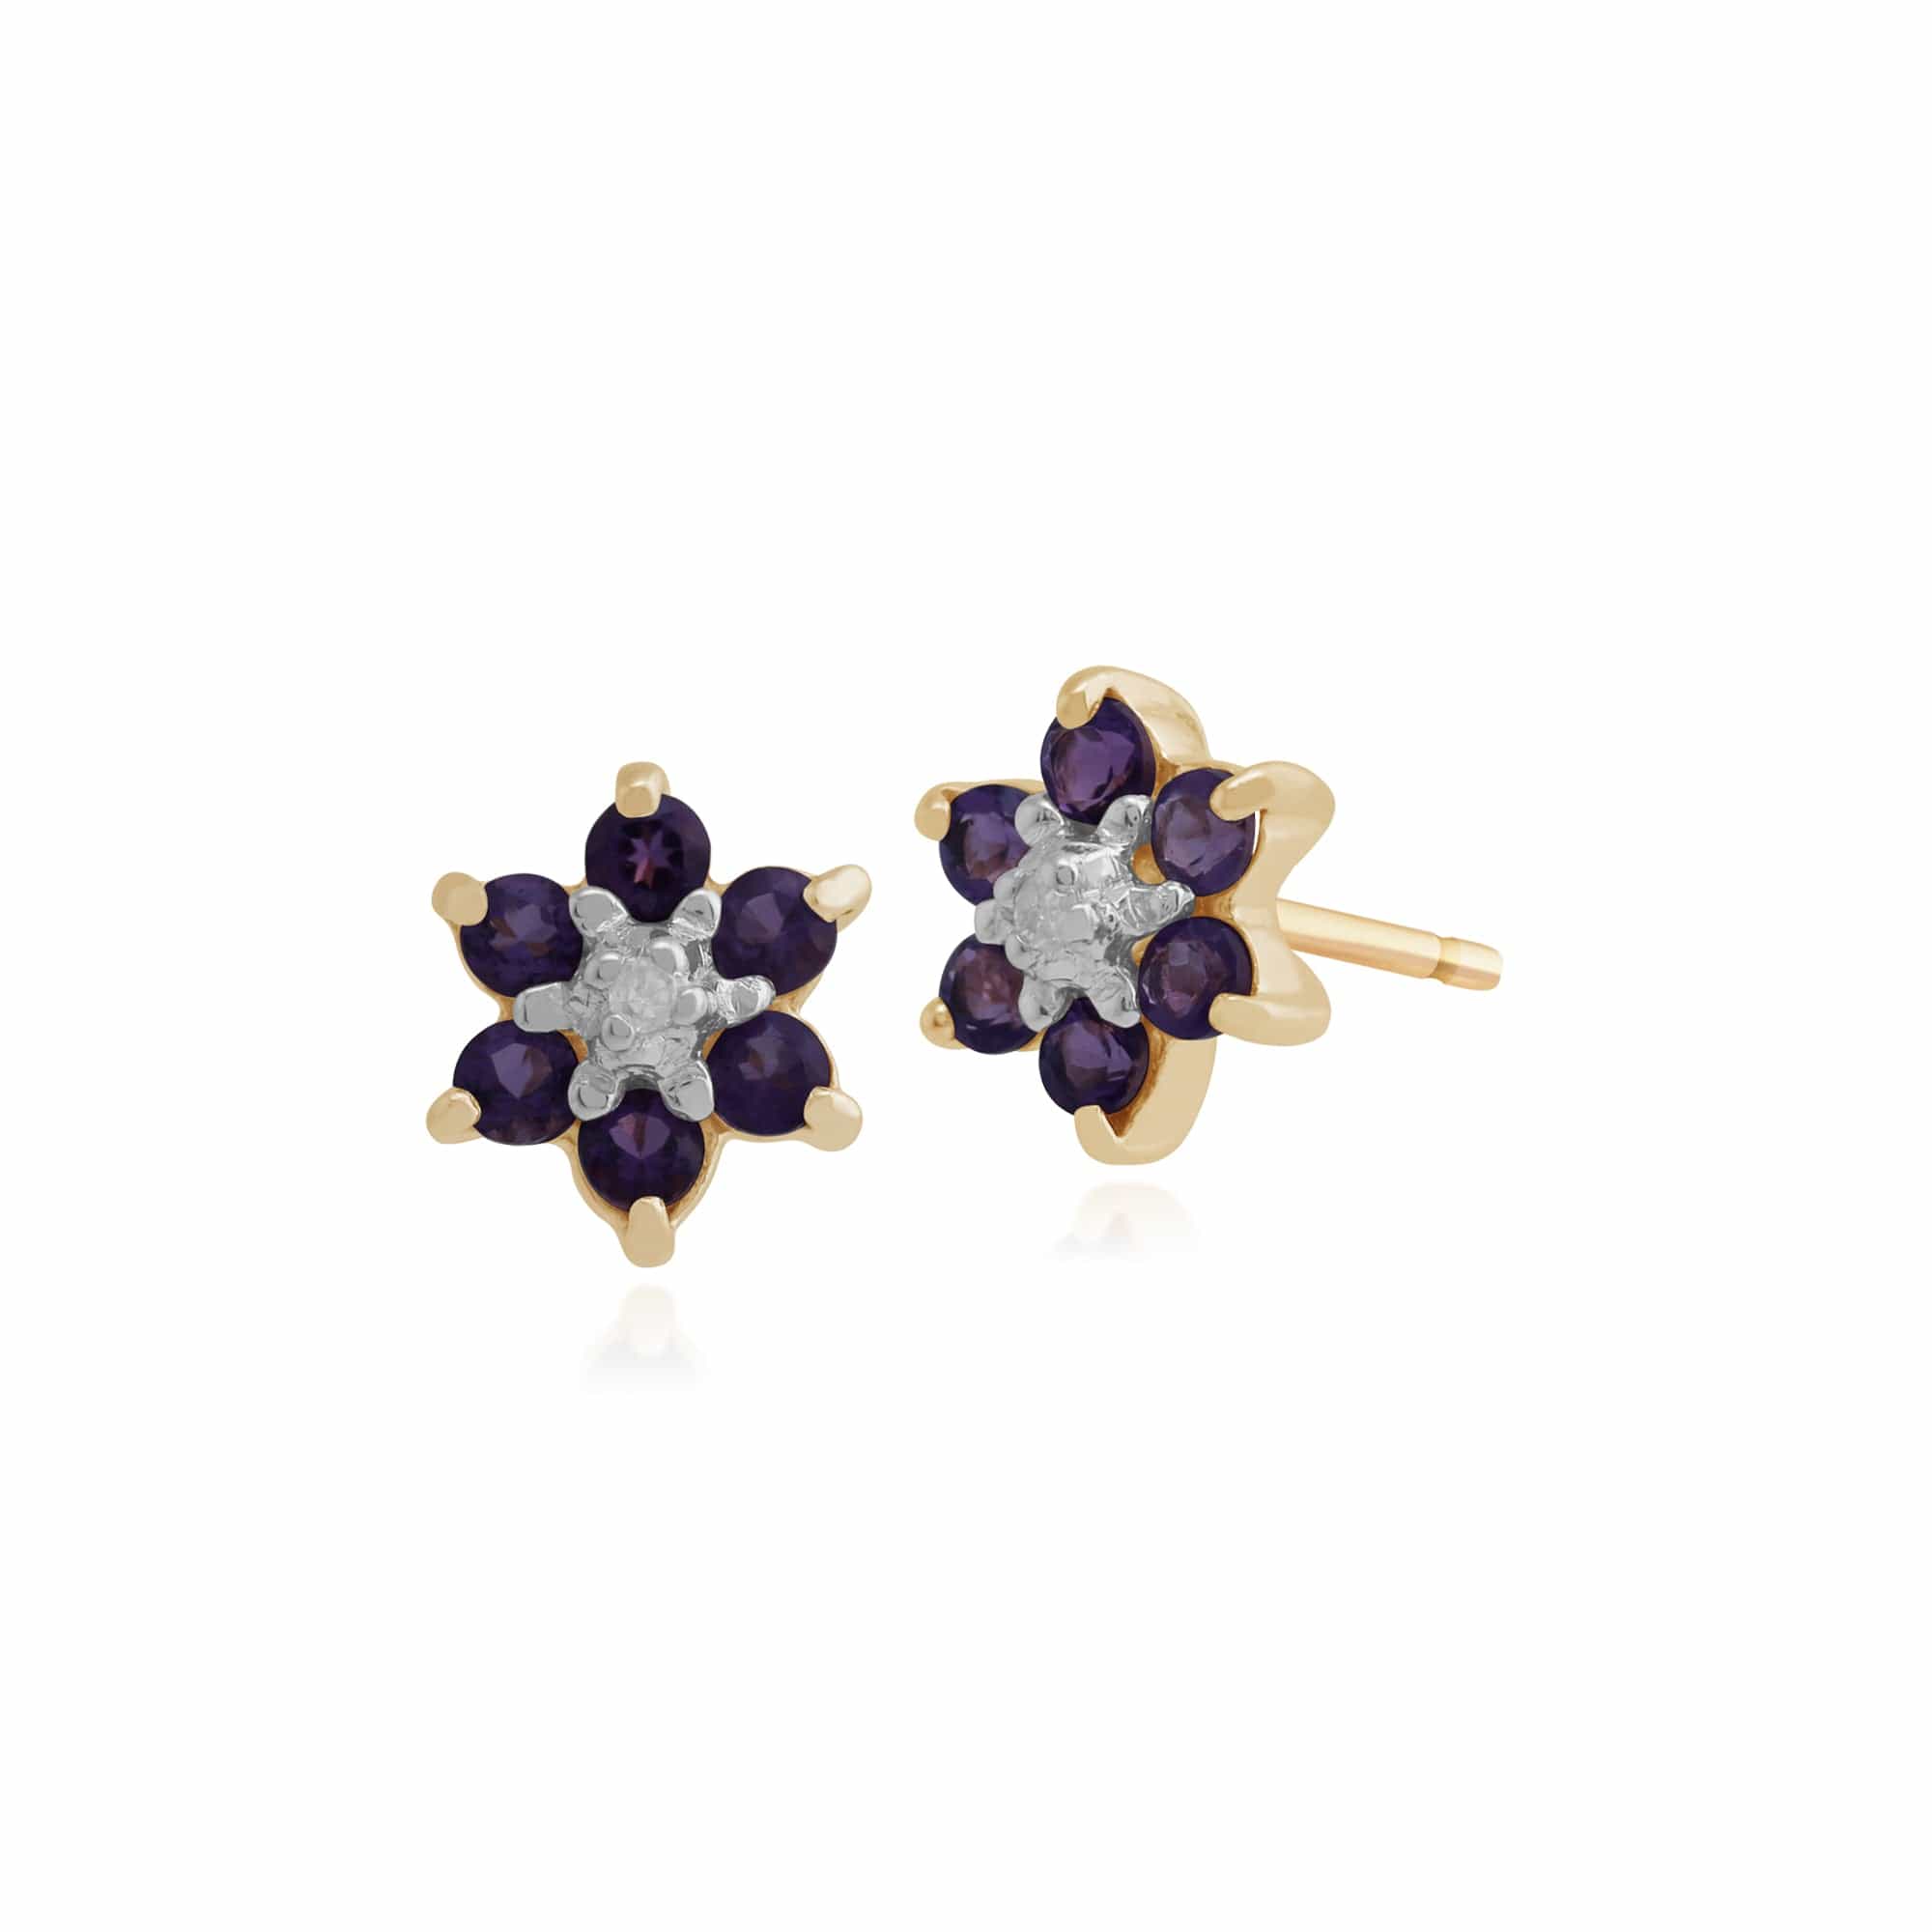 Floral Round Amethyst & Diamond Cluster Stud Earrings in 9ct Yellow Gold - Gemondo